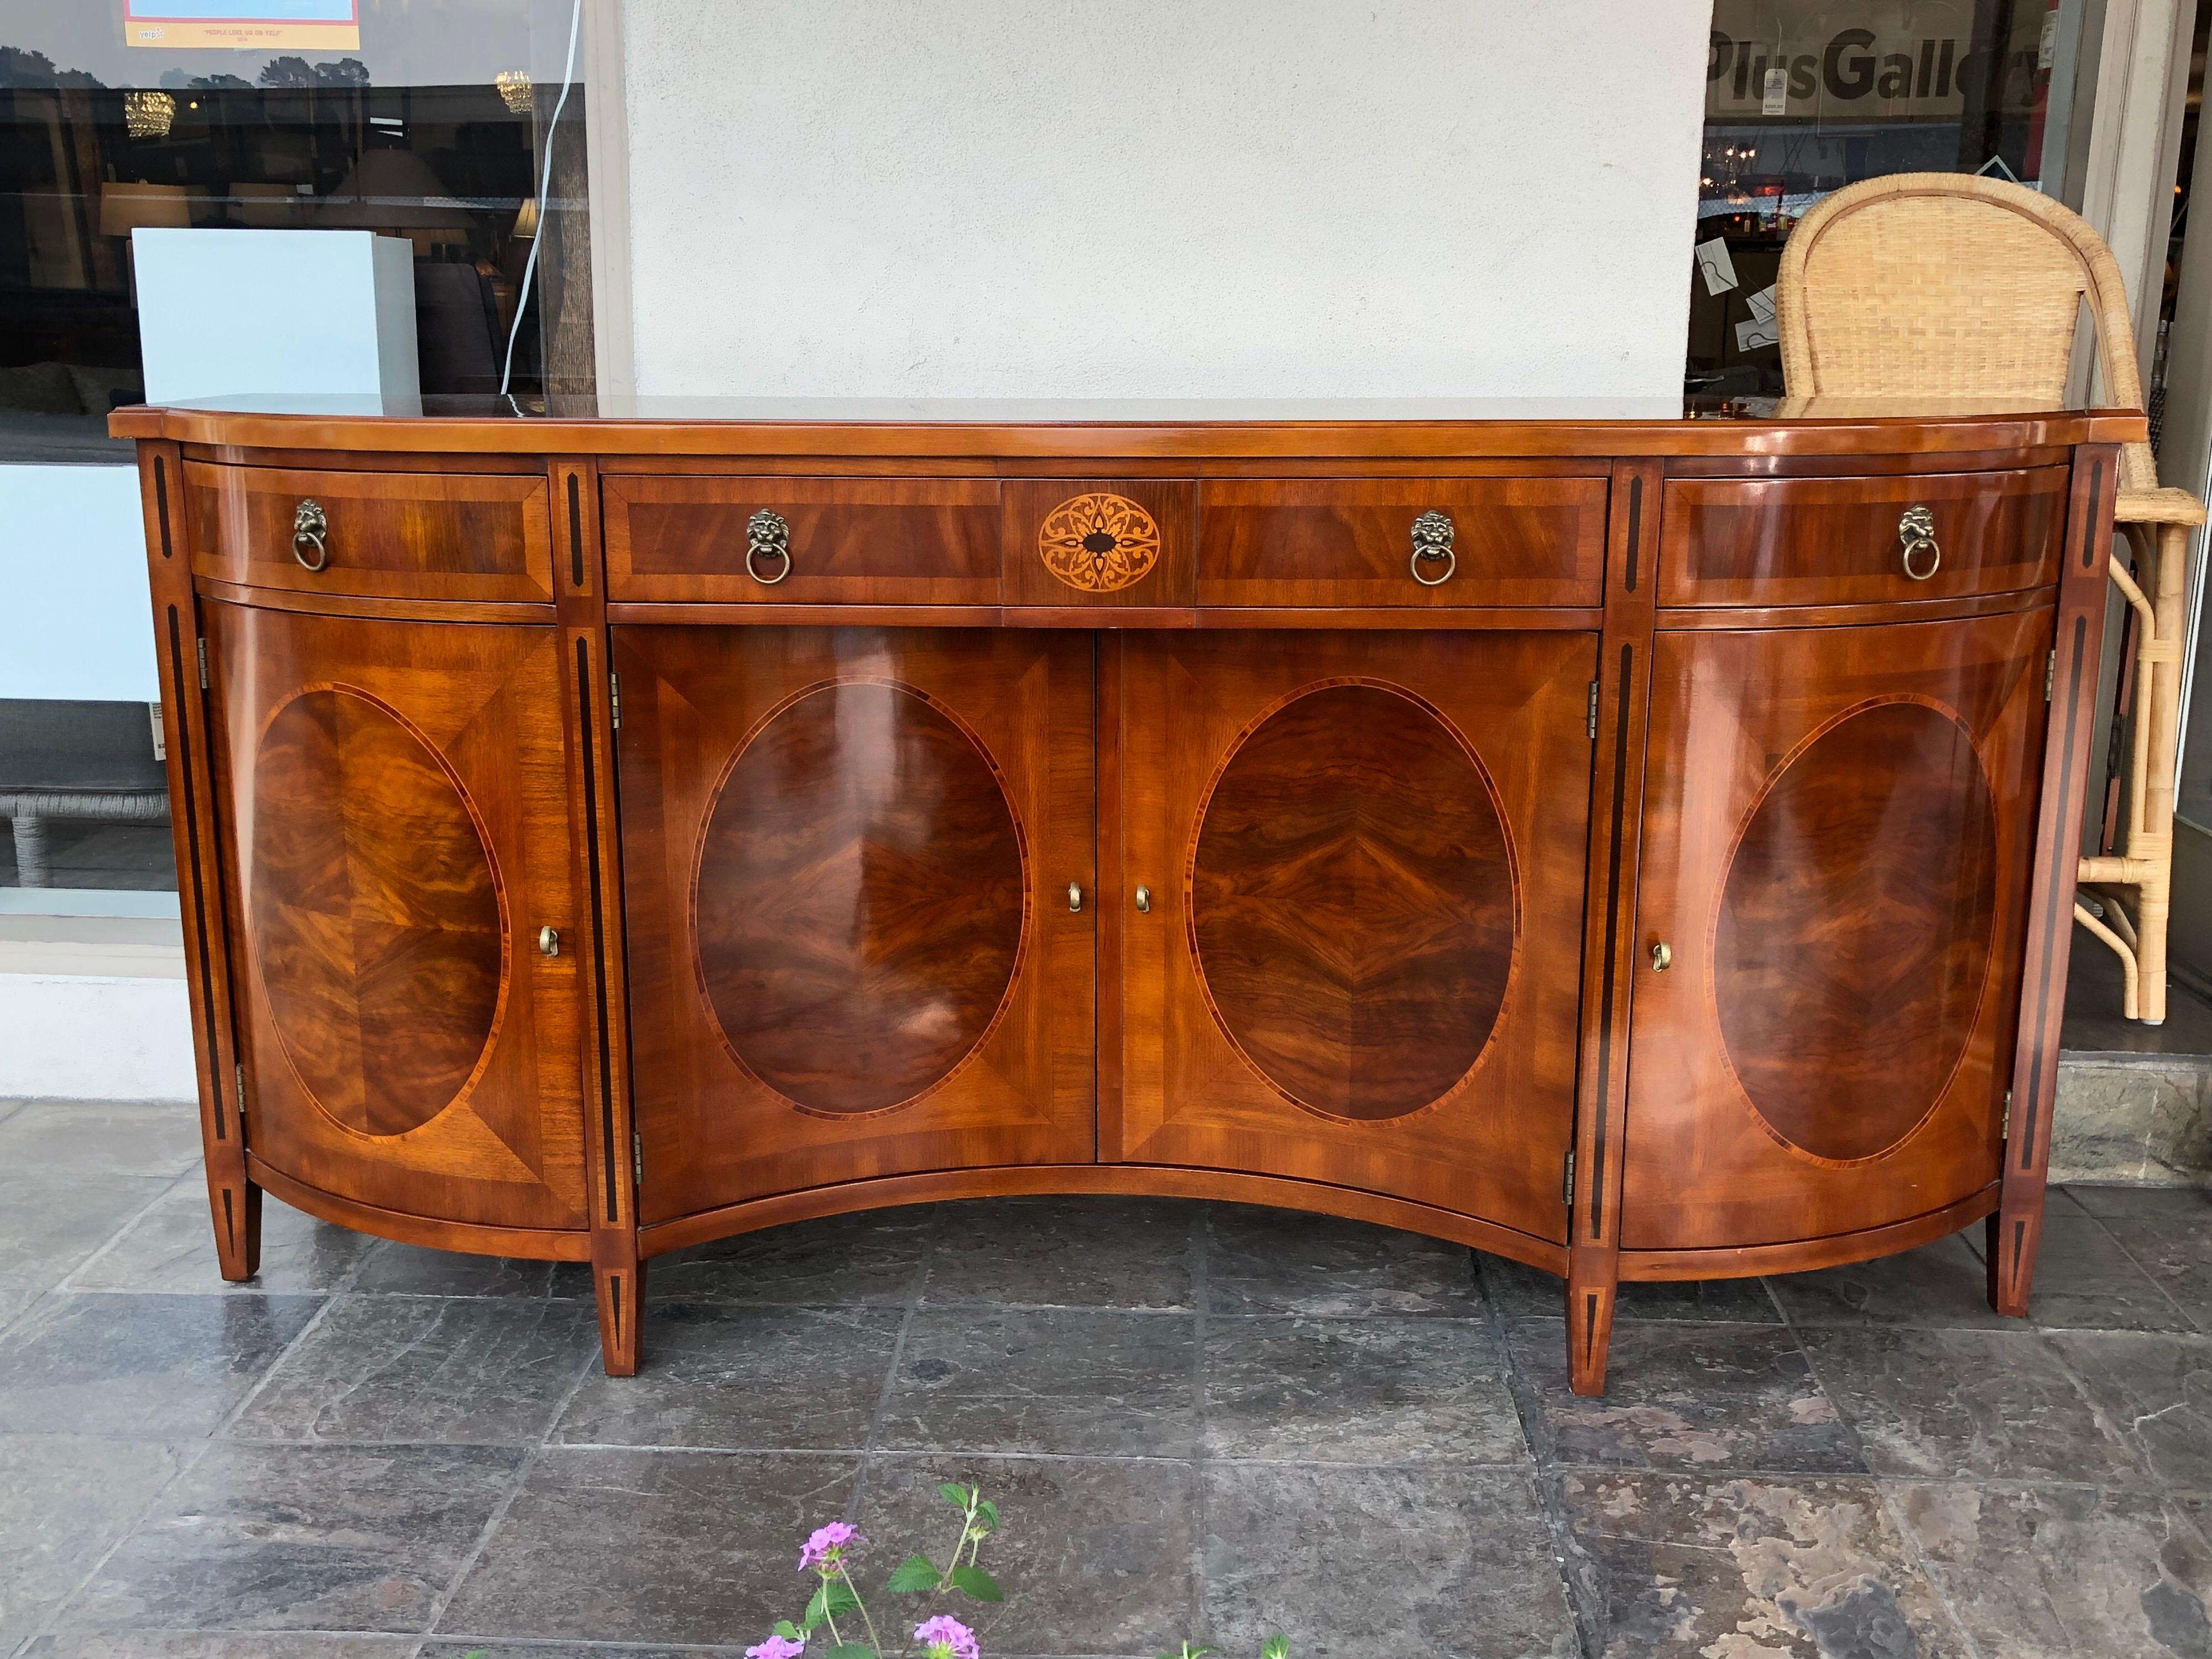 A Russian credenza mahogany inlaid sideboard buffet by John Widdicomb. A fine example of a neoclassical Russian credenza that features lion head drawer pulls and an elaborate inlaid decoration. The center drawer features a custom silverware drawer